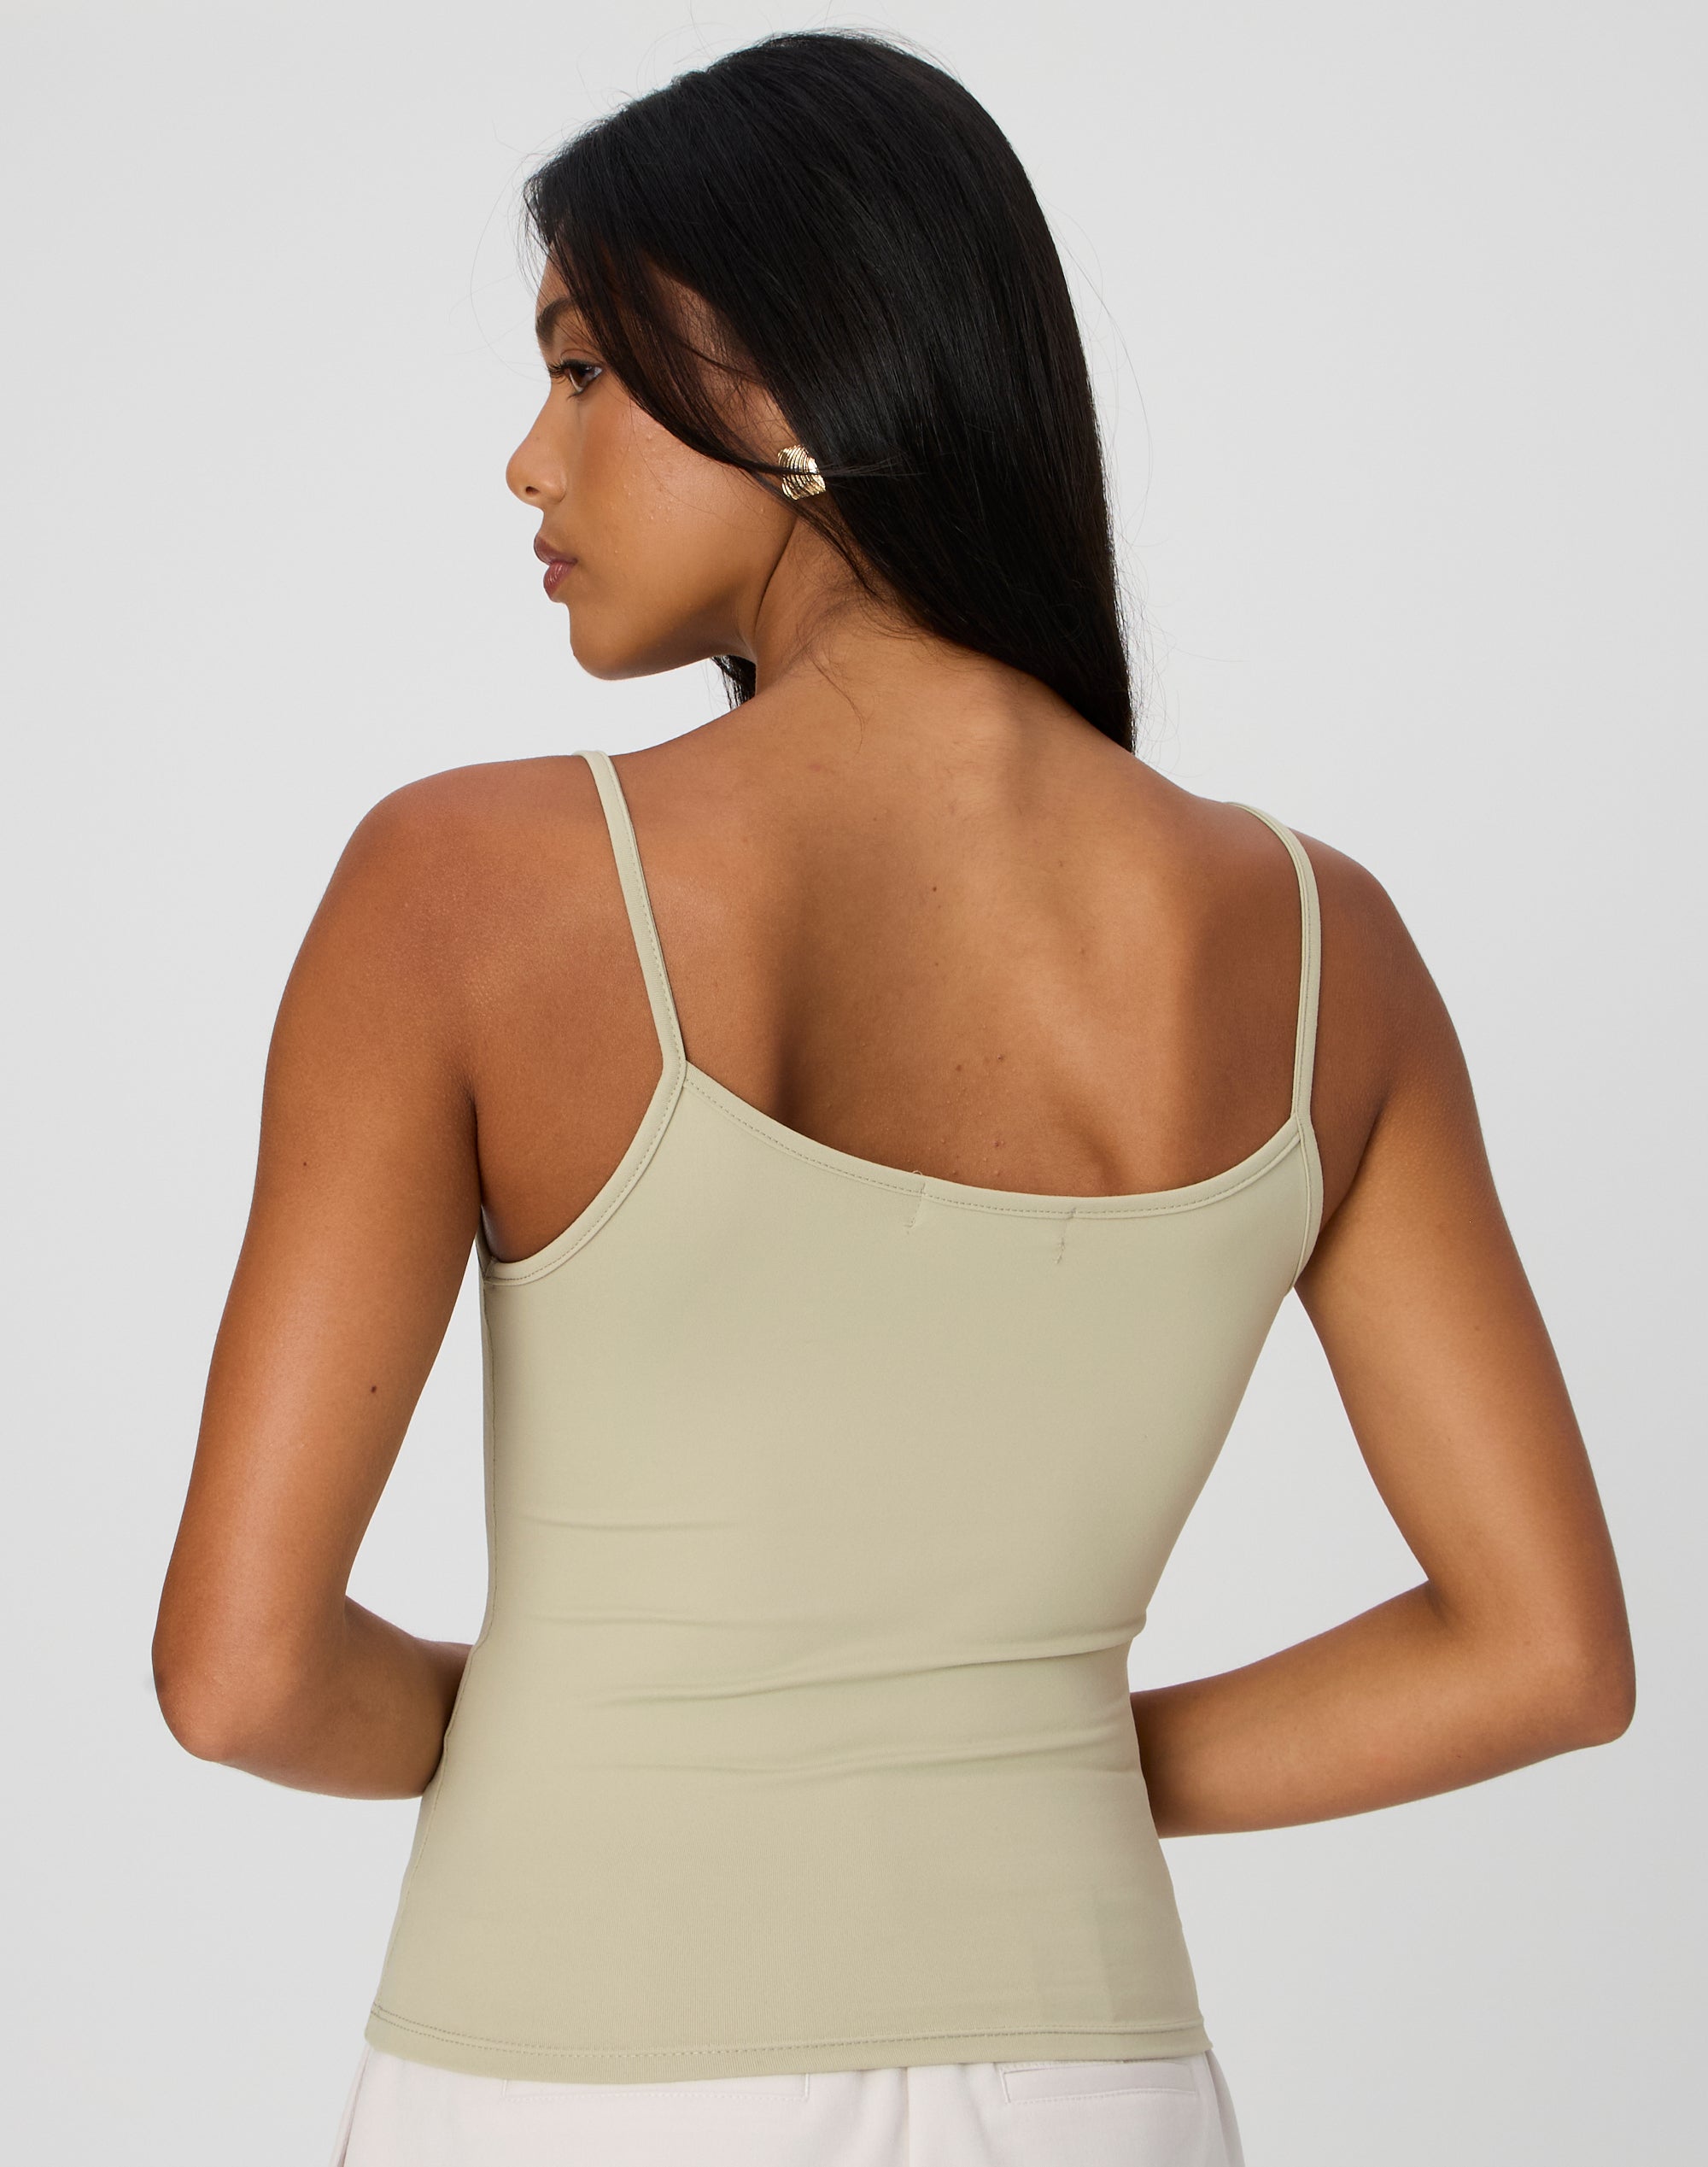 Ribbed Thick Strap Tank in Pale Grey Marle